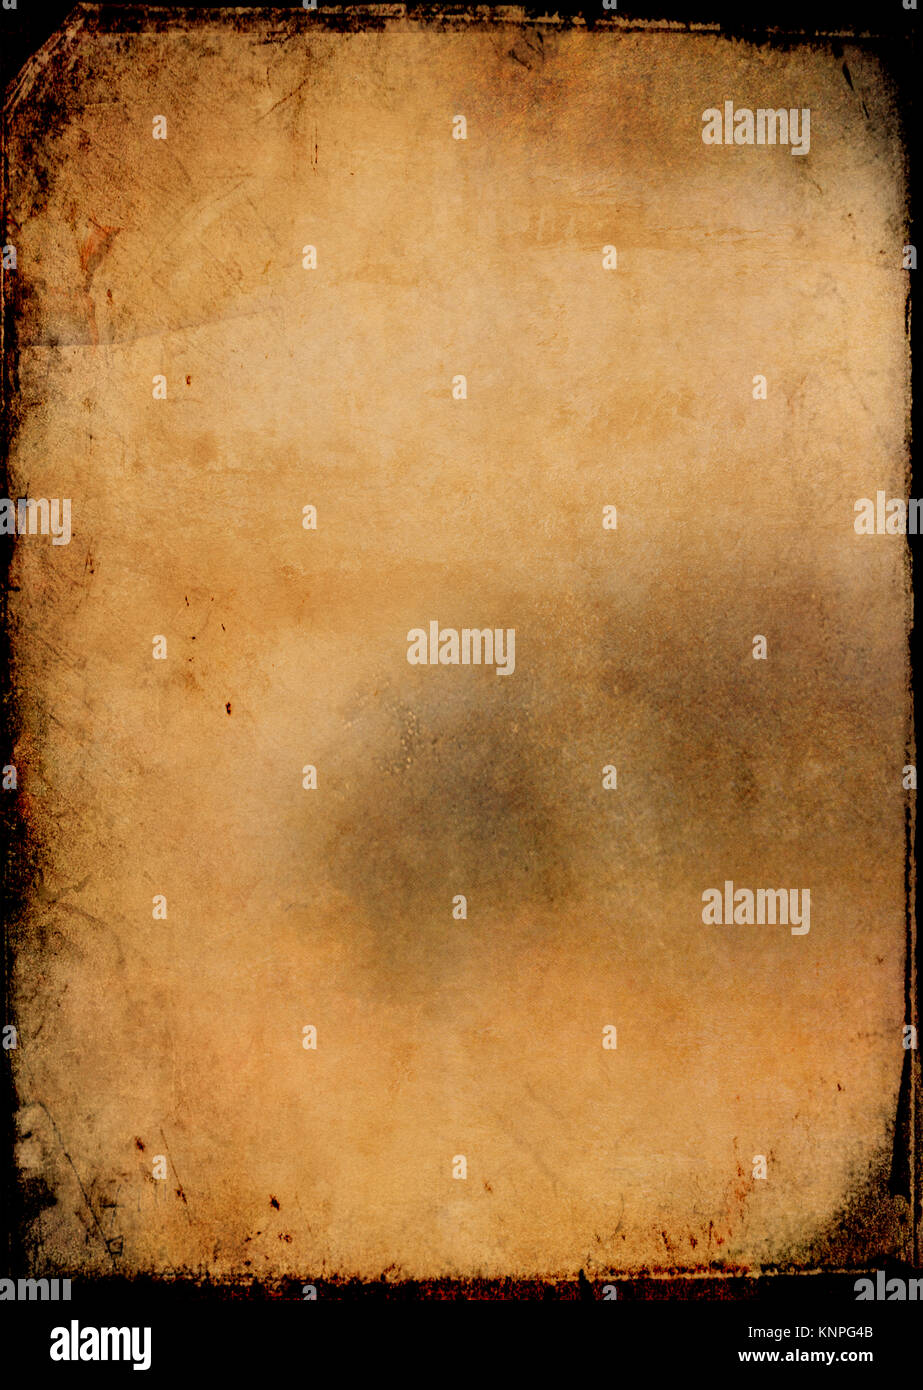 Old paper texture with abstract grunge border. Grunge paper background for the design. Stock Photo